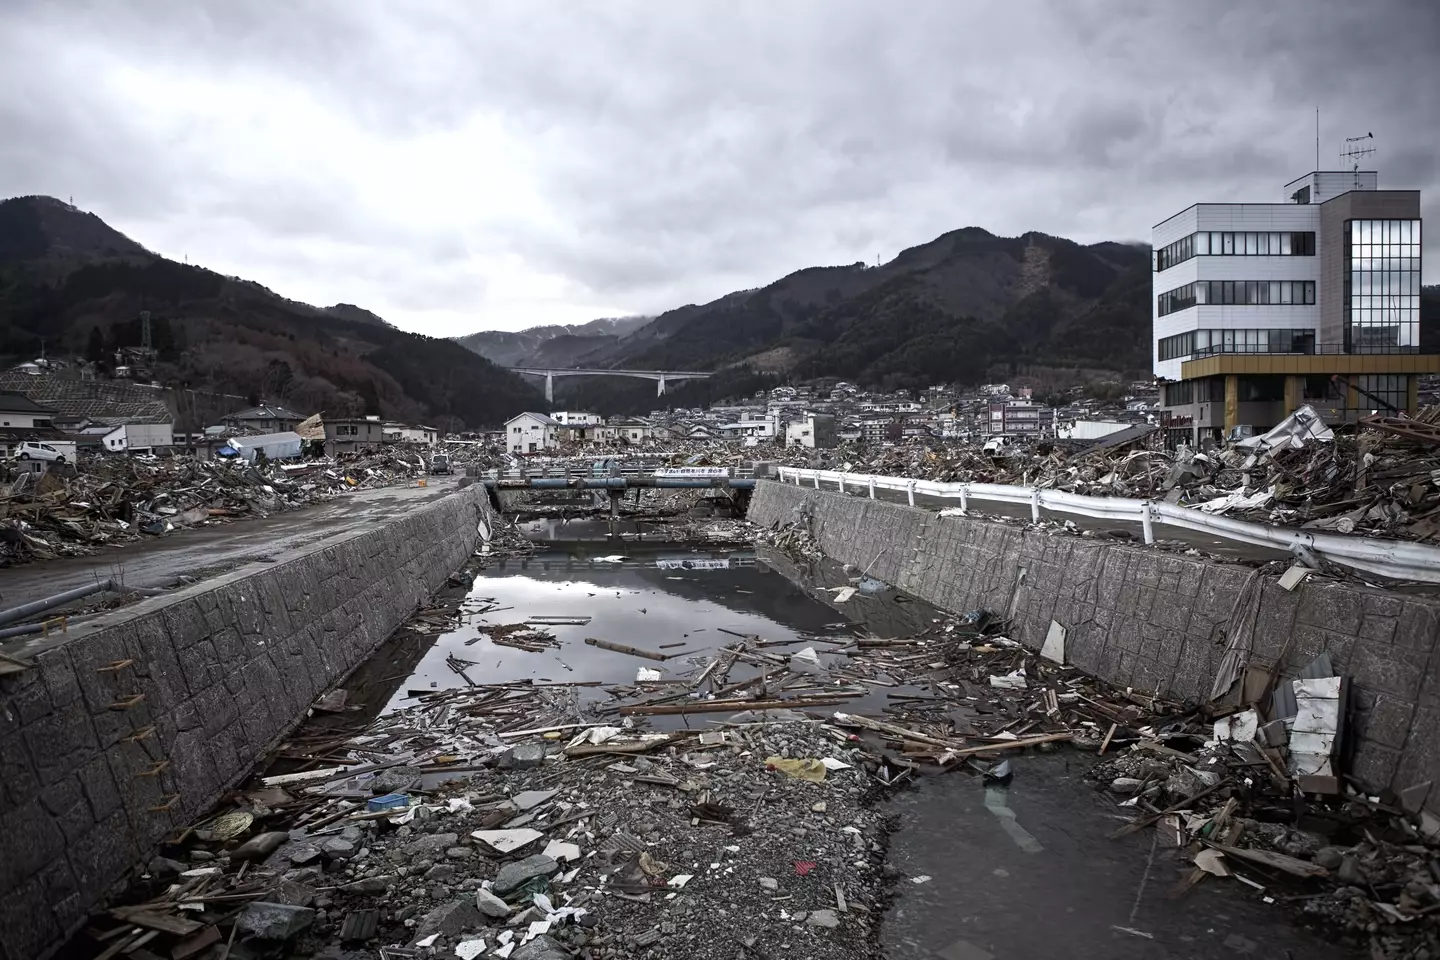 Fukushima, Japan, in the wake of the tsunami that tore through the prefecture.